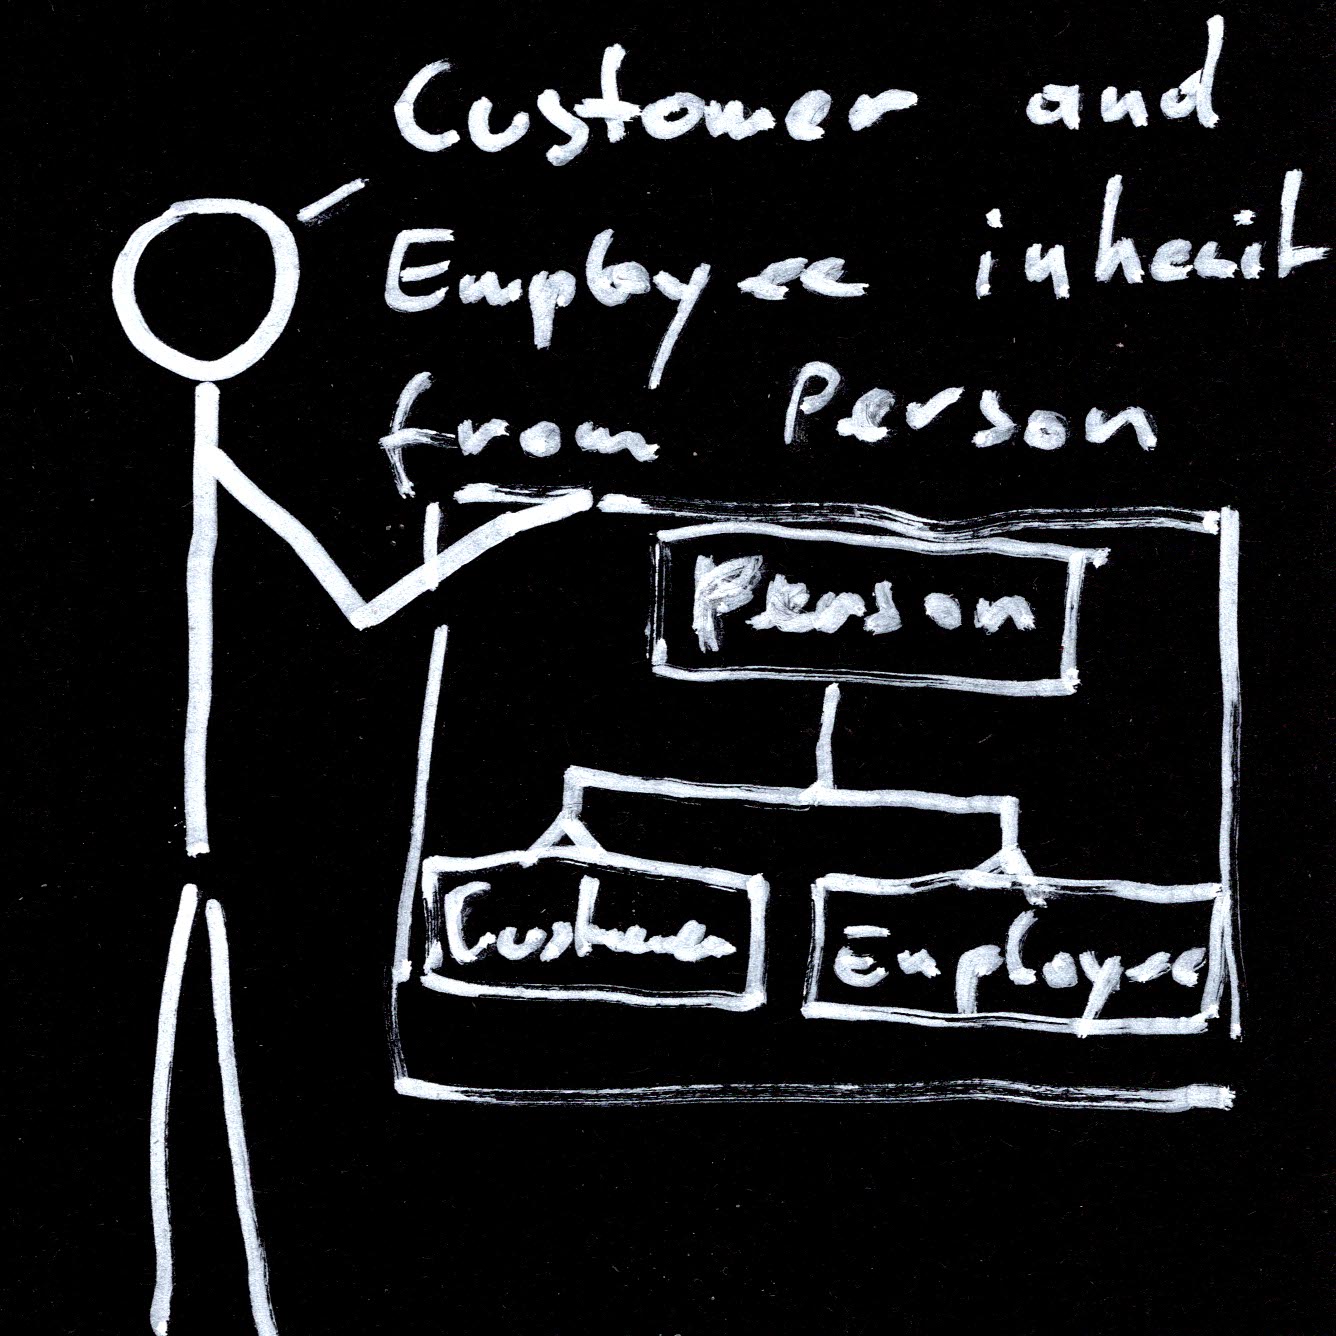 Customer and Employee inherit from Person